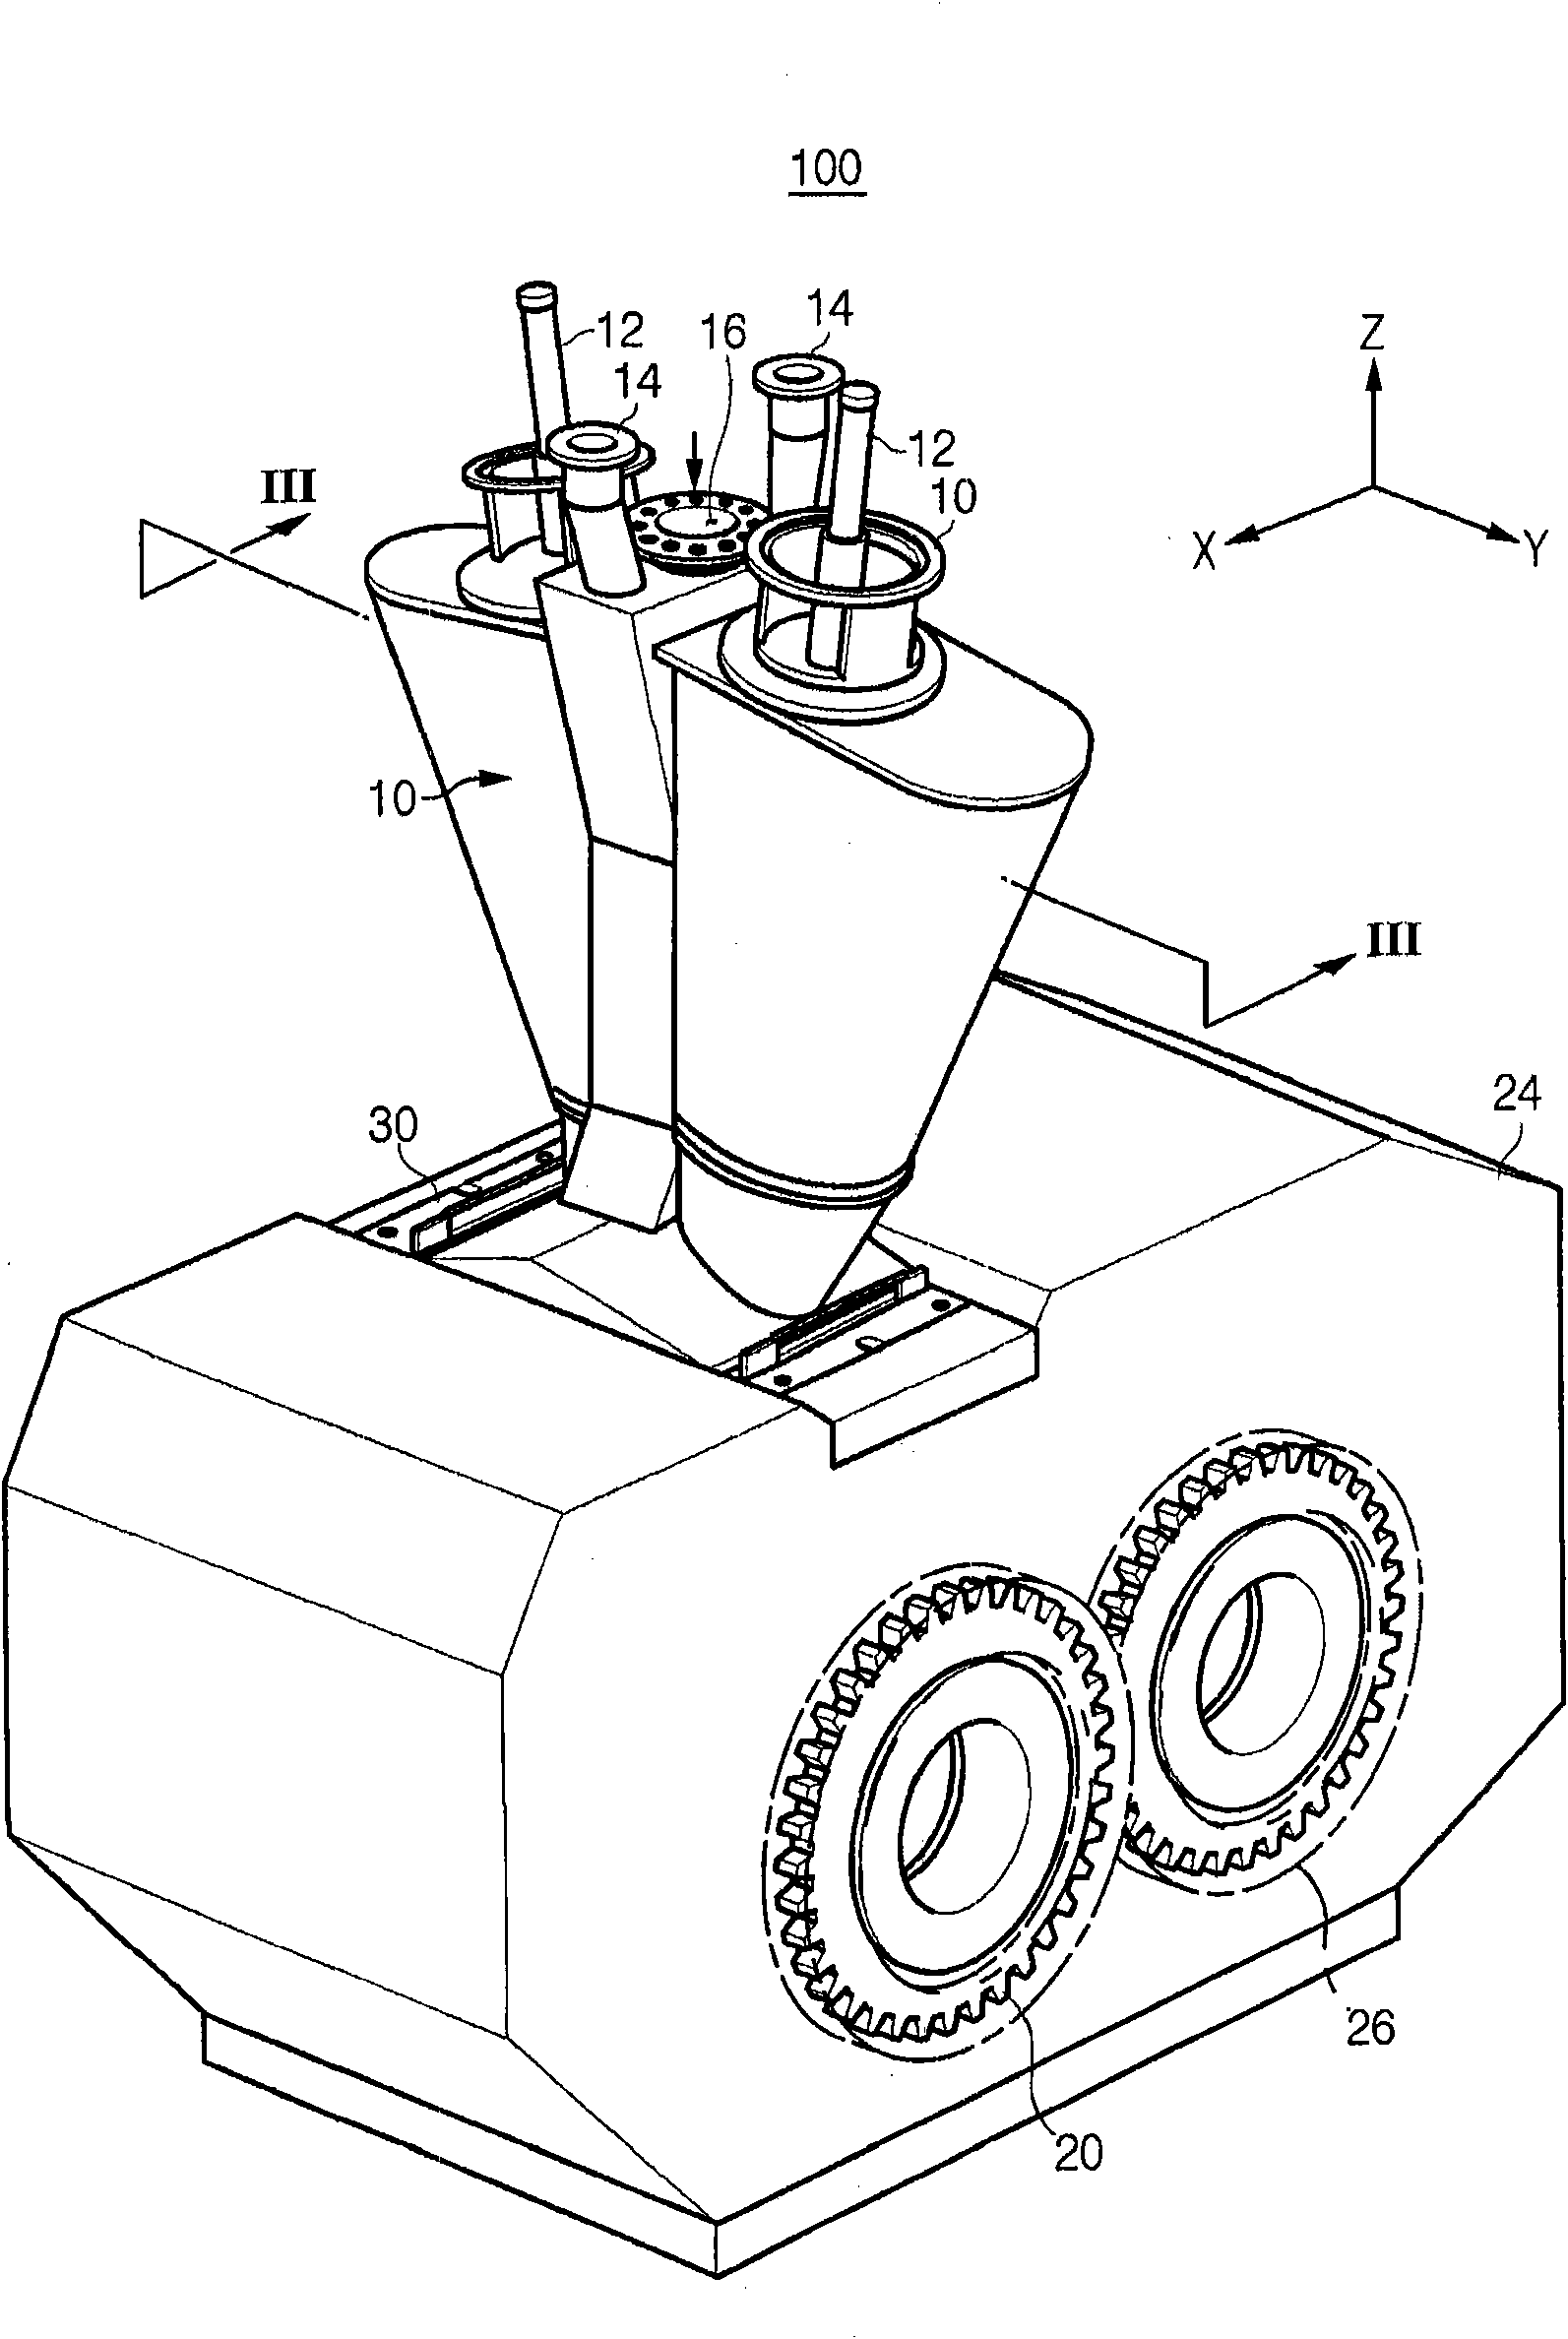 Apparatus for manufacturing compacted irons of reduced materials comprising fine direct reduced irons and apparatus for manufacturing molten irons provided with the same